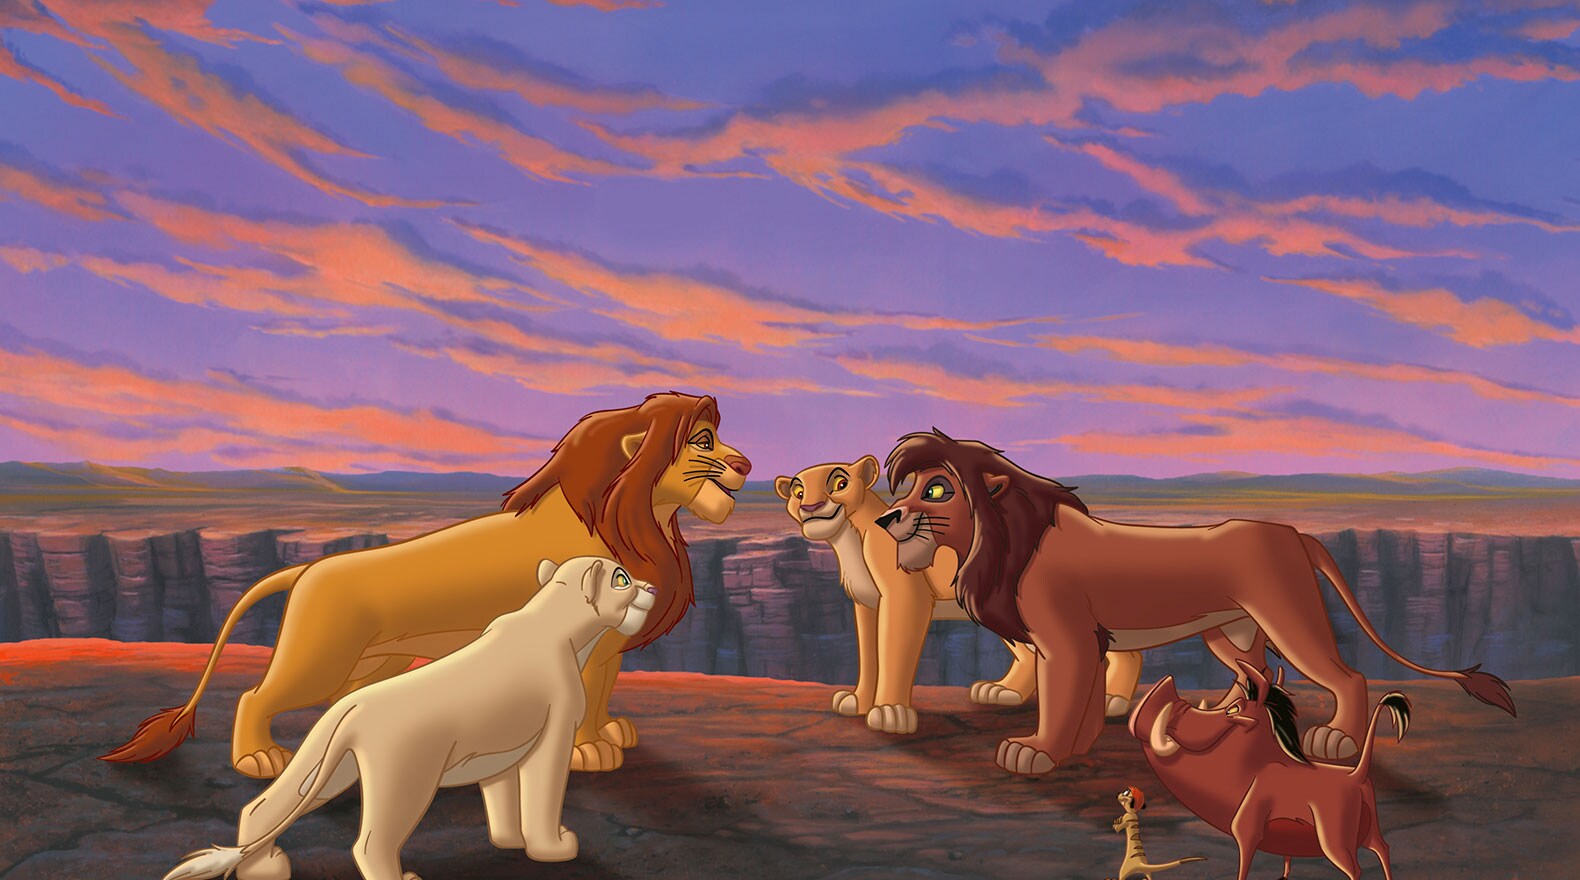 watch lion king 2 the full movie